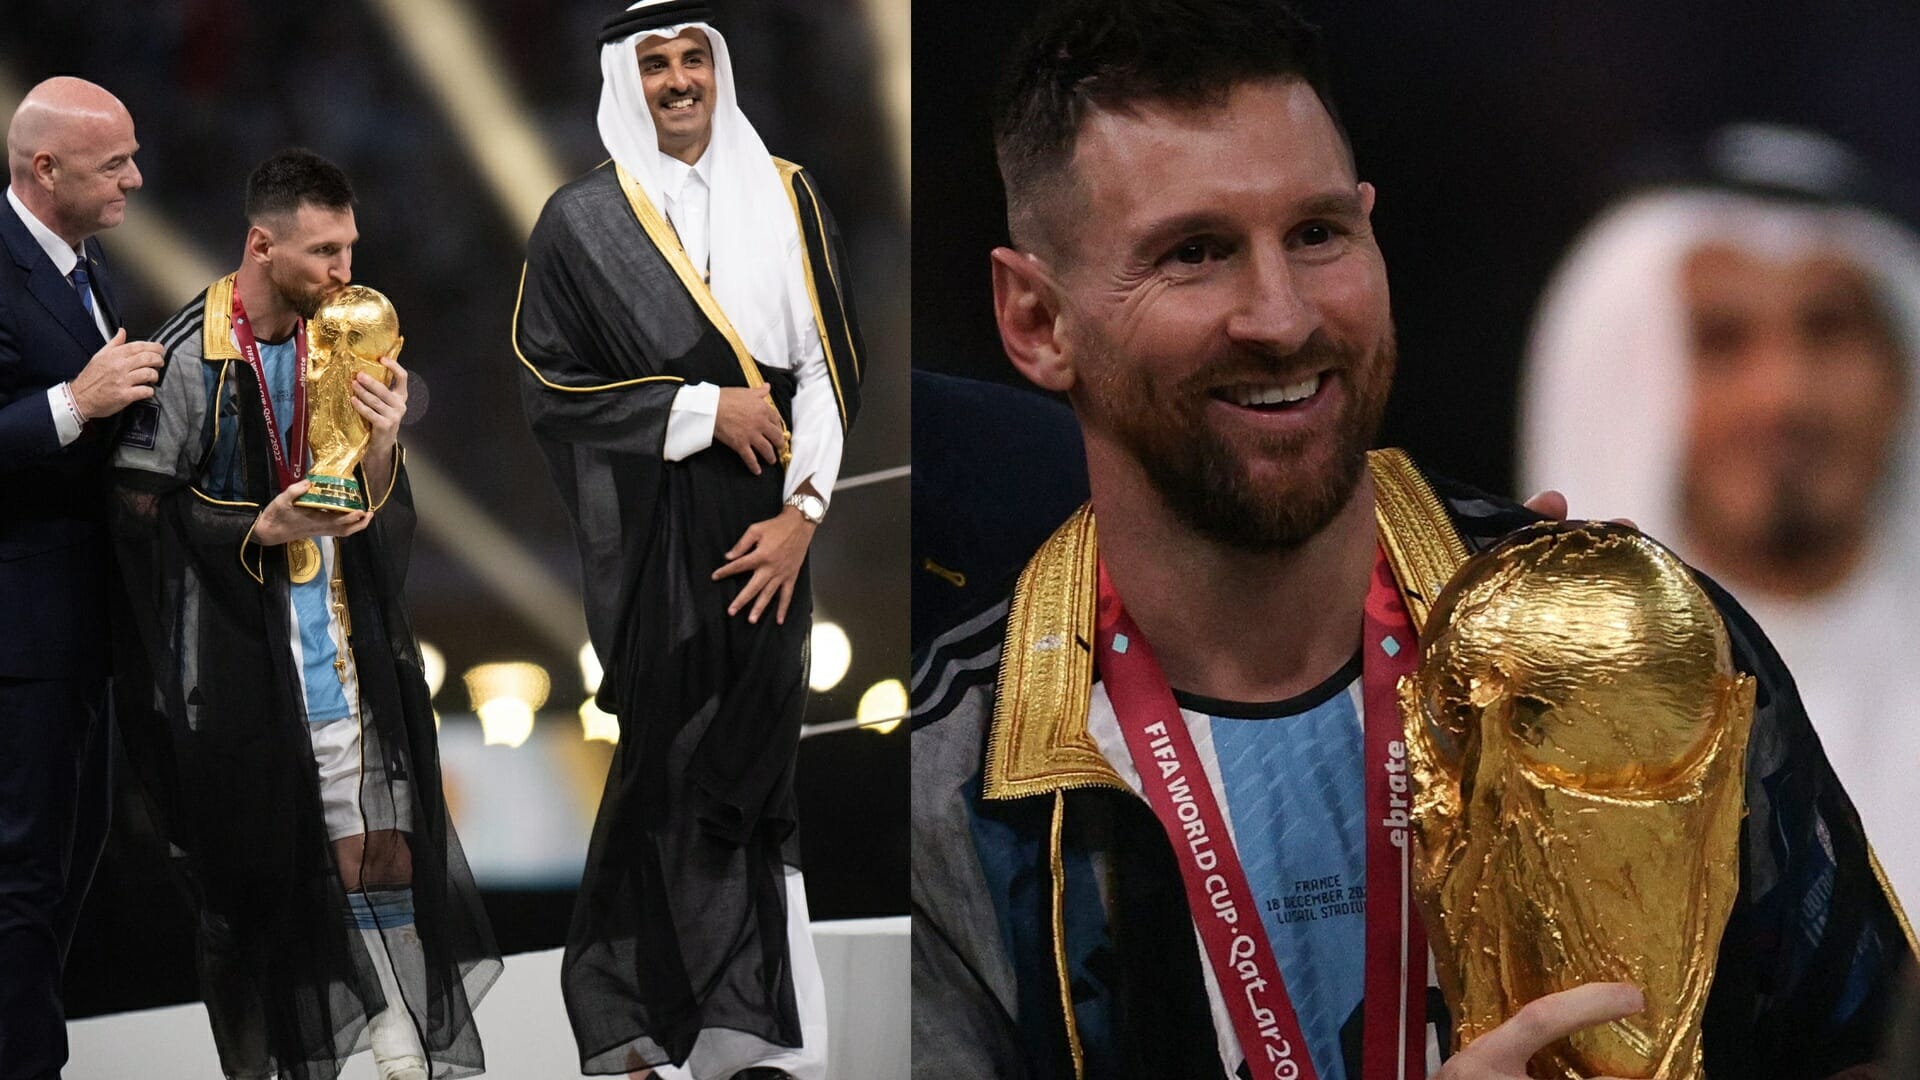 The Emir of Qatar dressing Messi in the Arab Bisht raises the racism and anger of the German press